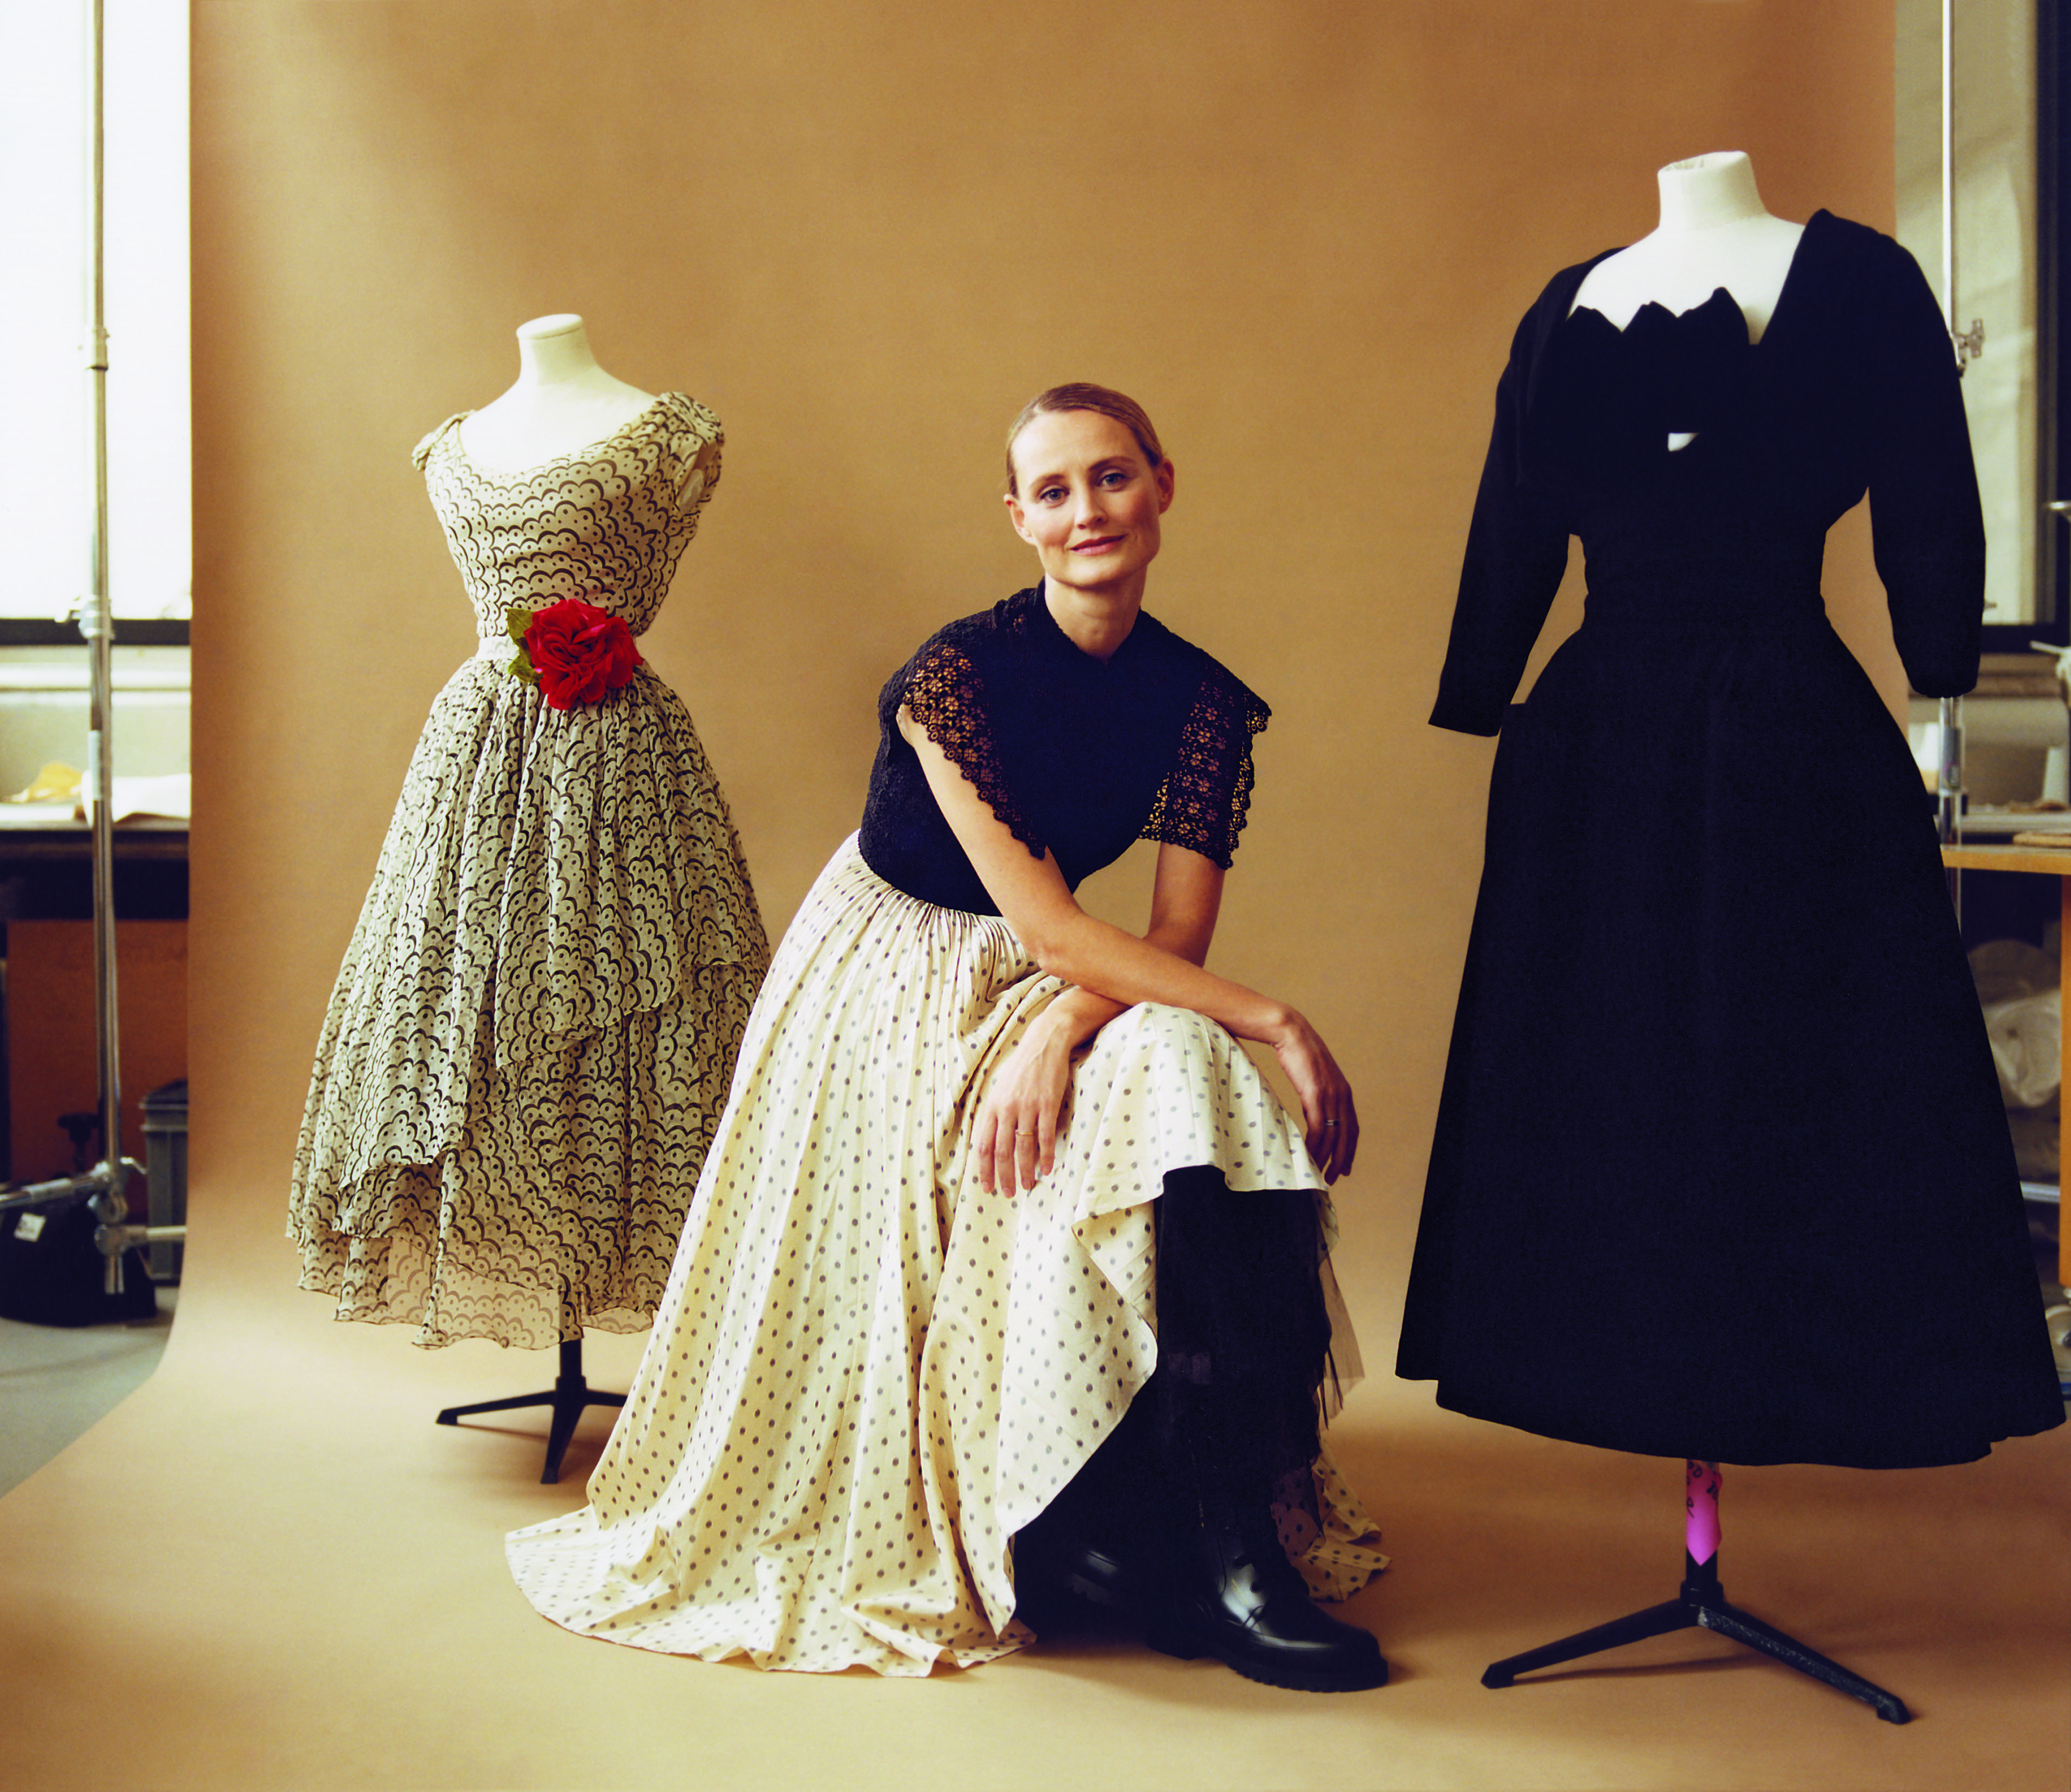 Dior At the V&A: Meet Oriole Cullen, The Curator Readying The